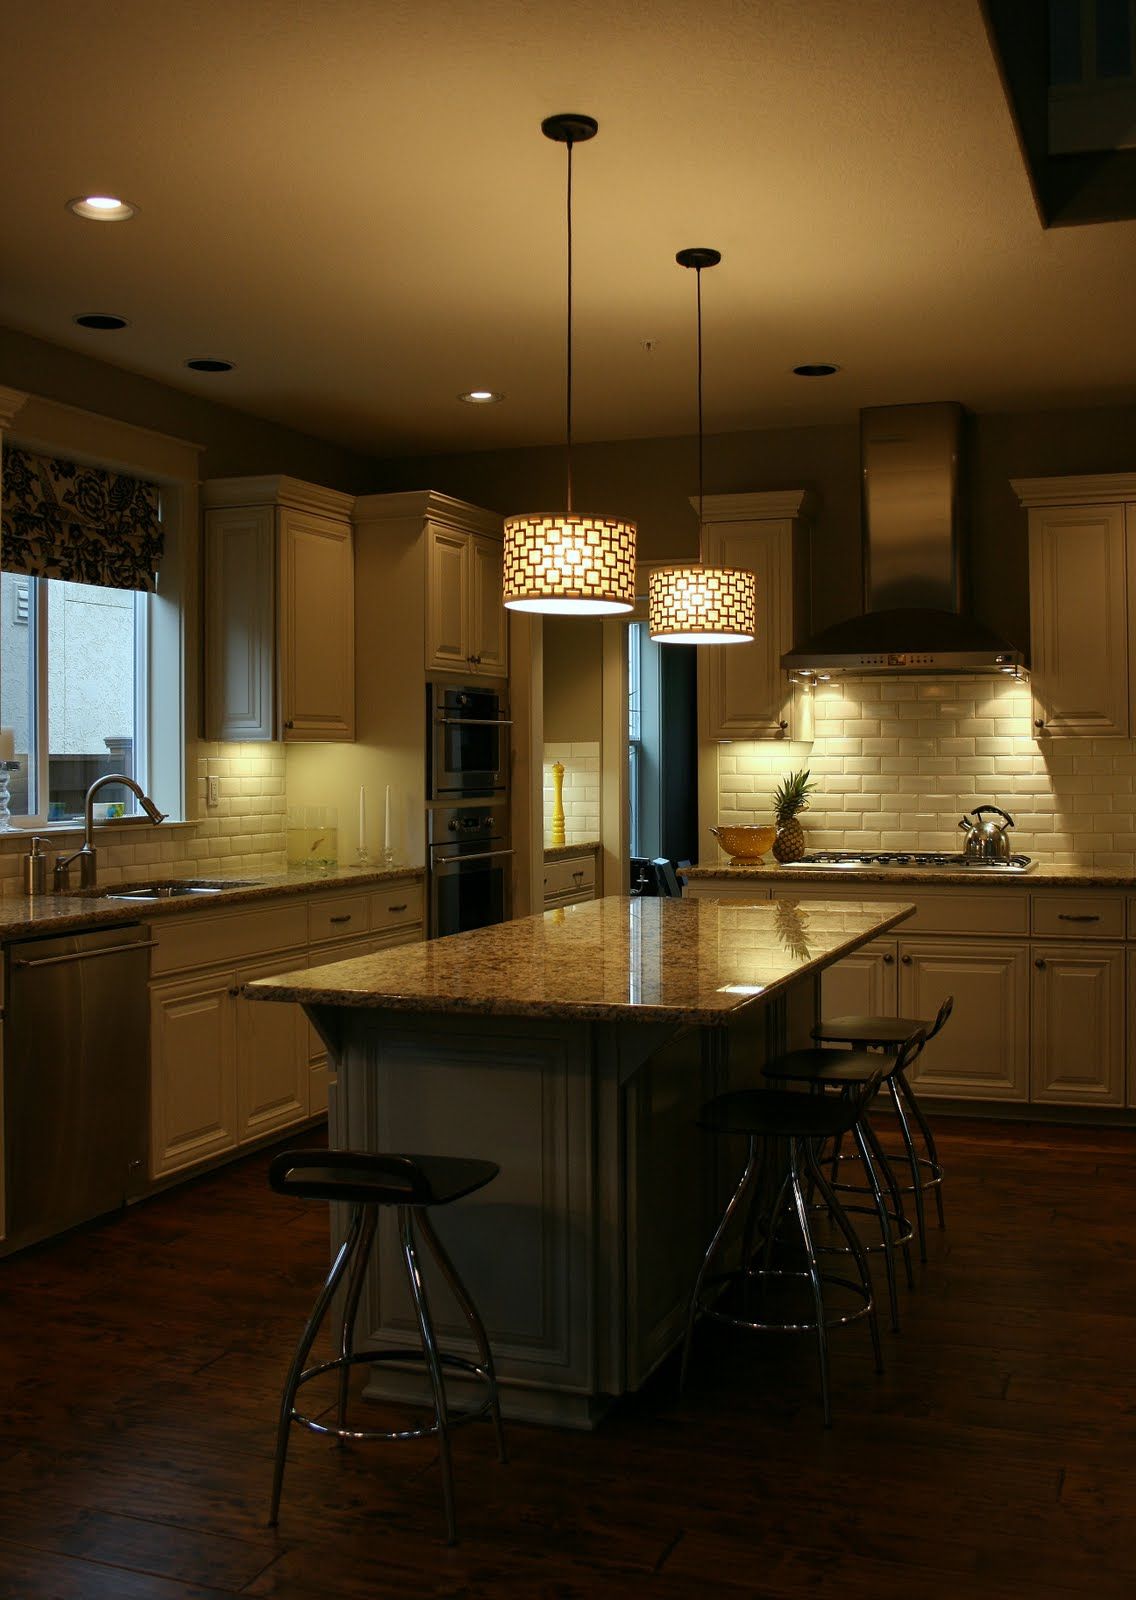 Kitchen Island Lighting System With Pendant And Chandelier Throughout Most Popular Wood Kitchen Island Light Chandeliers (View 8 of 20)